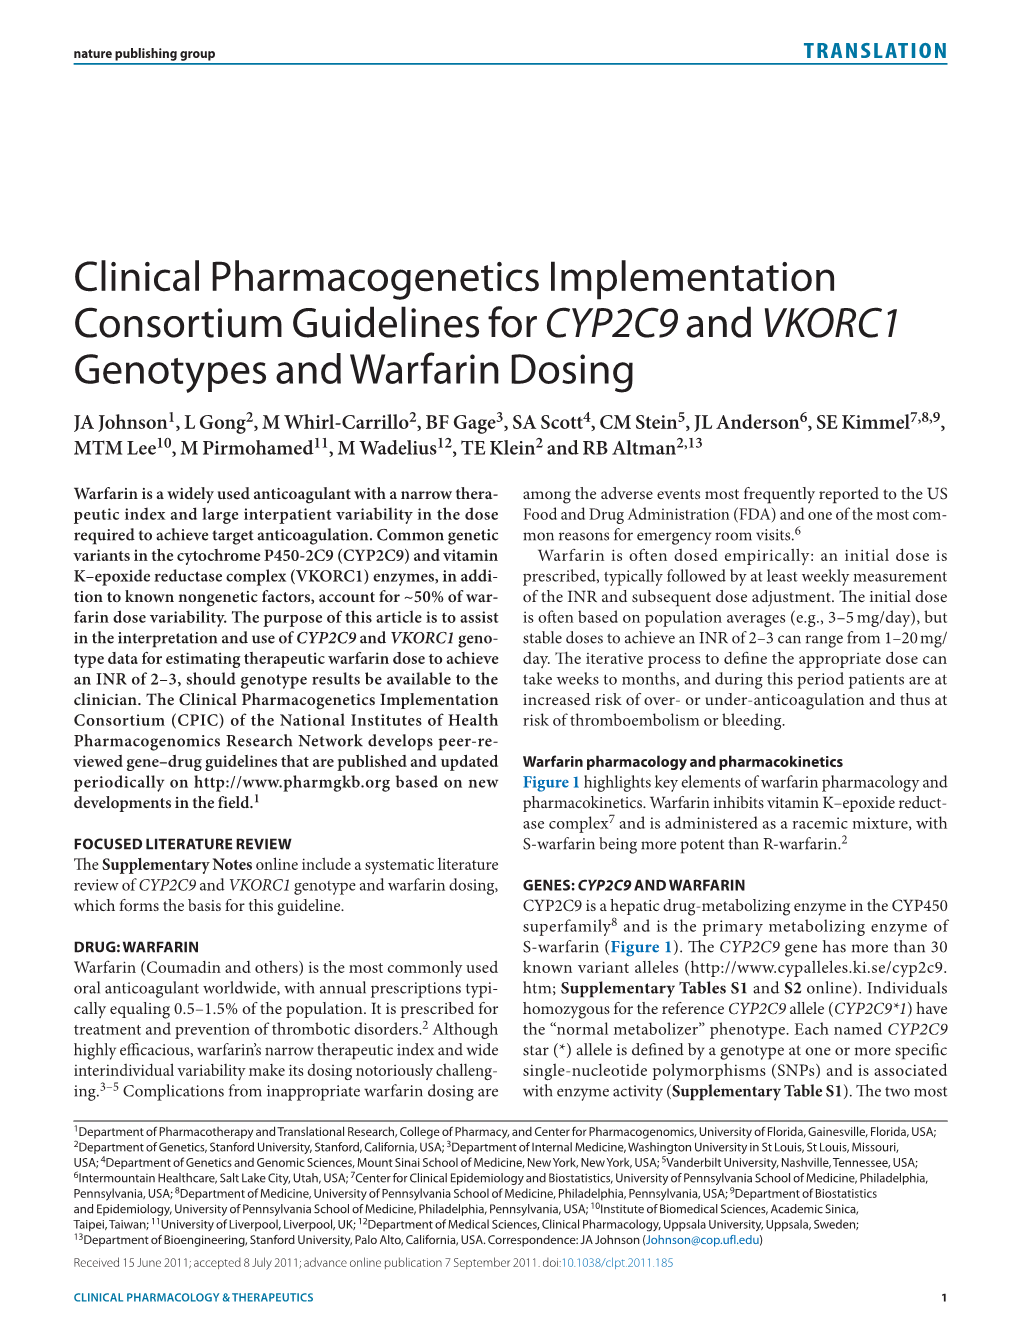 Clinical Pharmacogenetics Implementation Consortium Guidelines for Cyp2c9and VKORC1 Genotypes and Warfarin Dosing